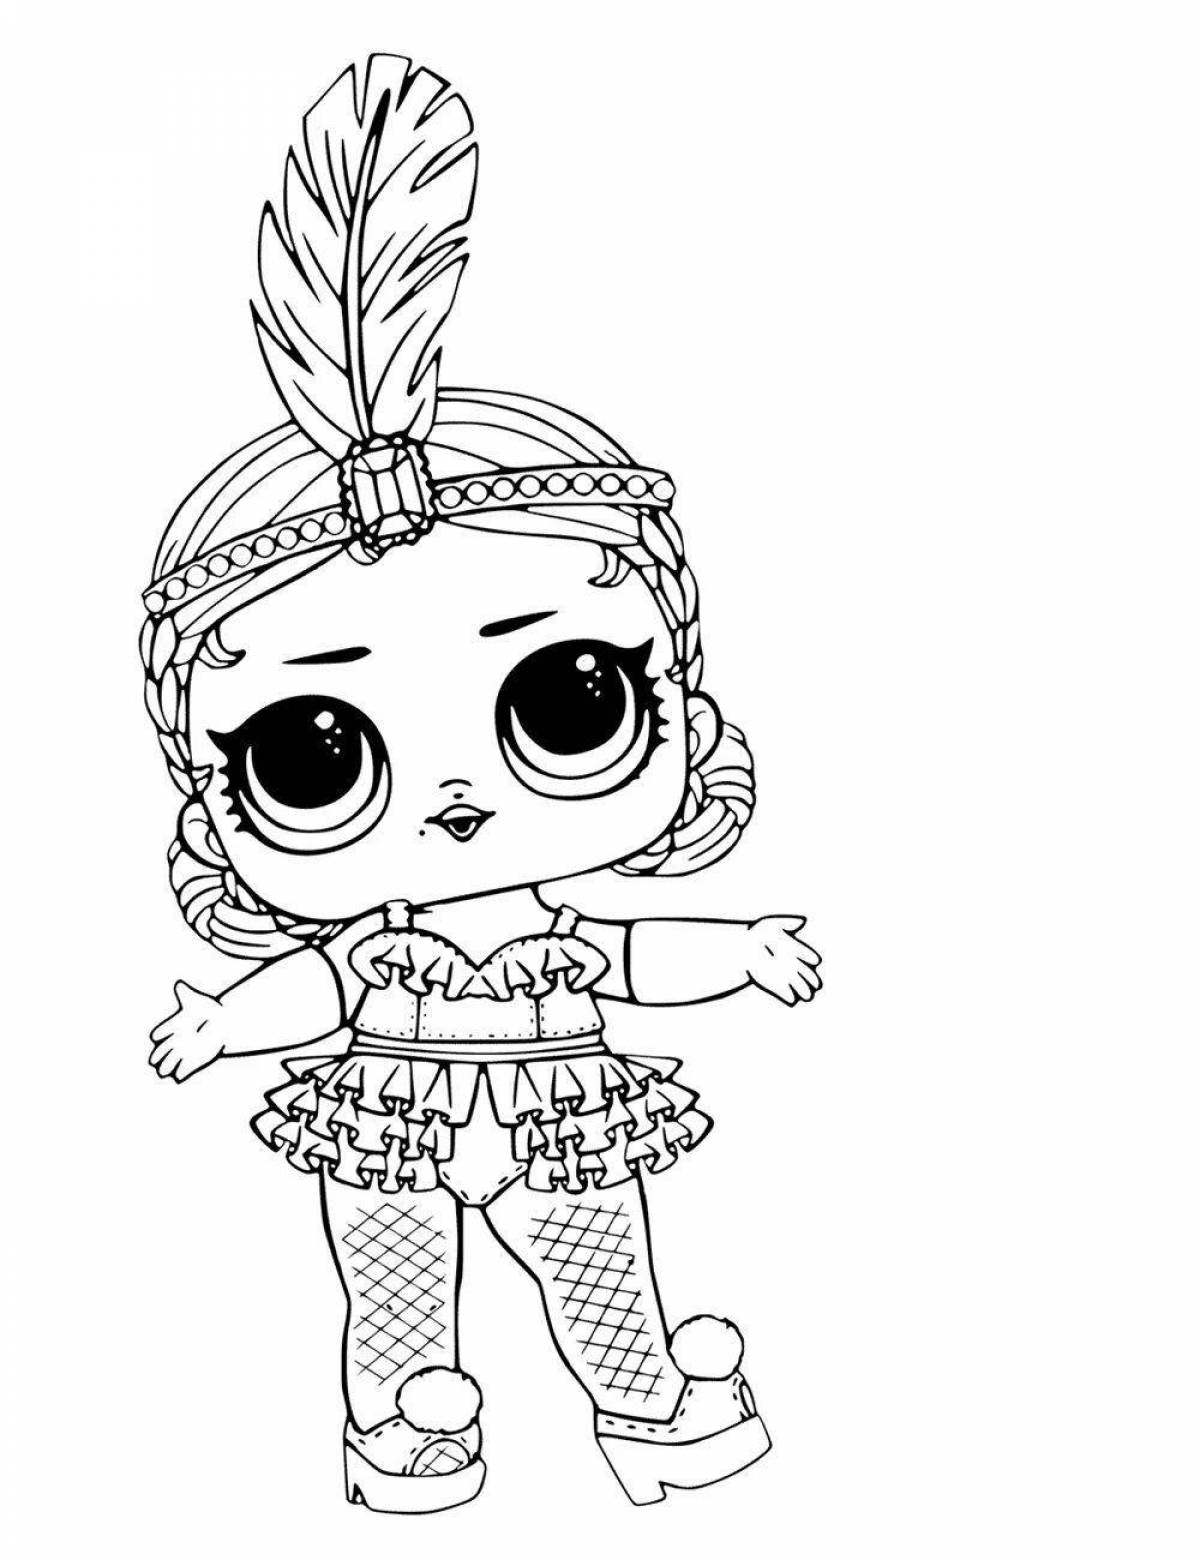 Lovely coloring page lol doll coloring book